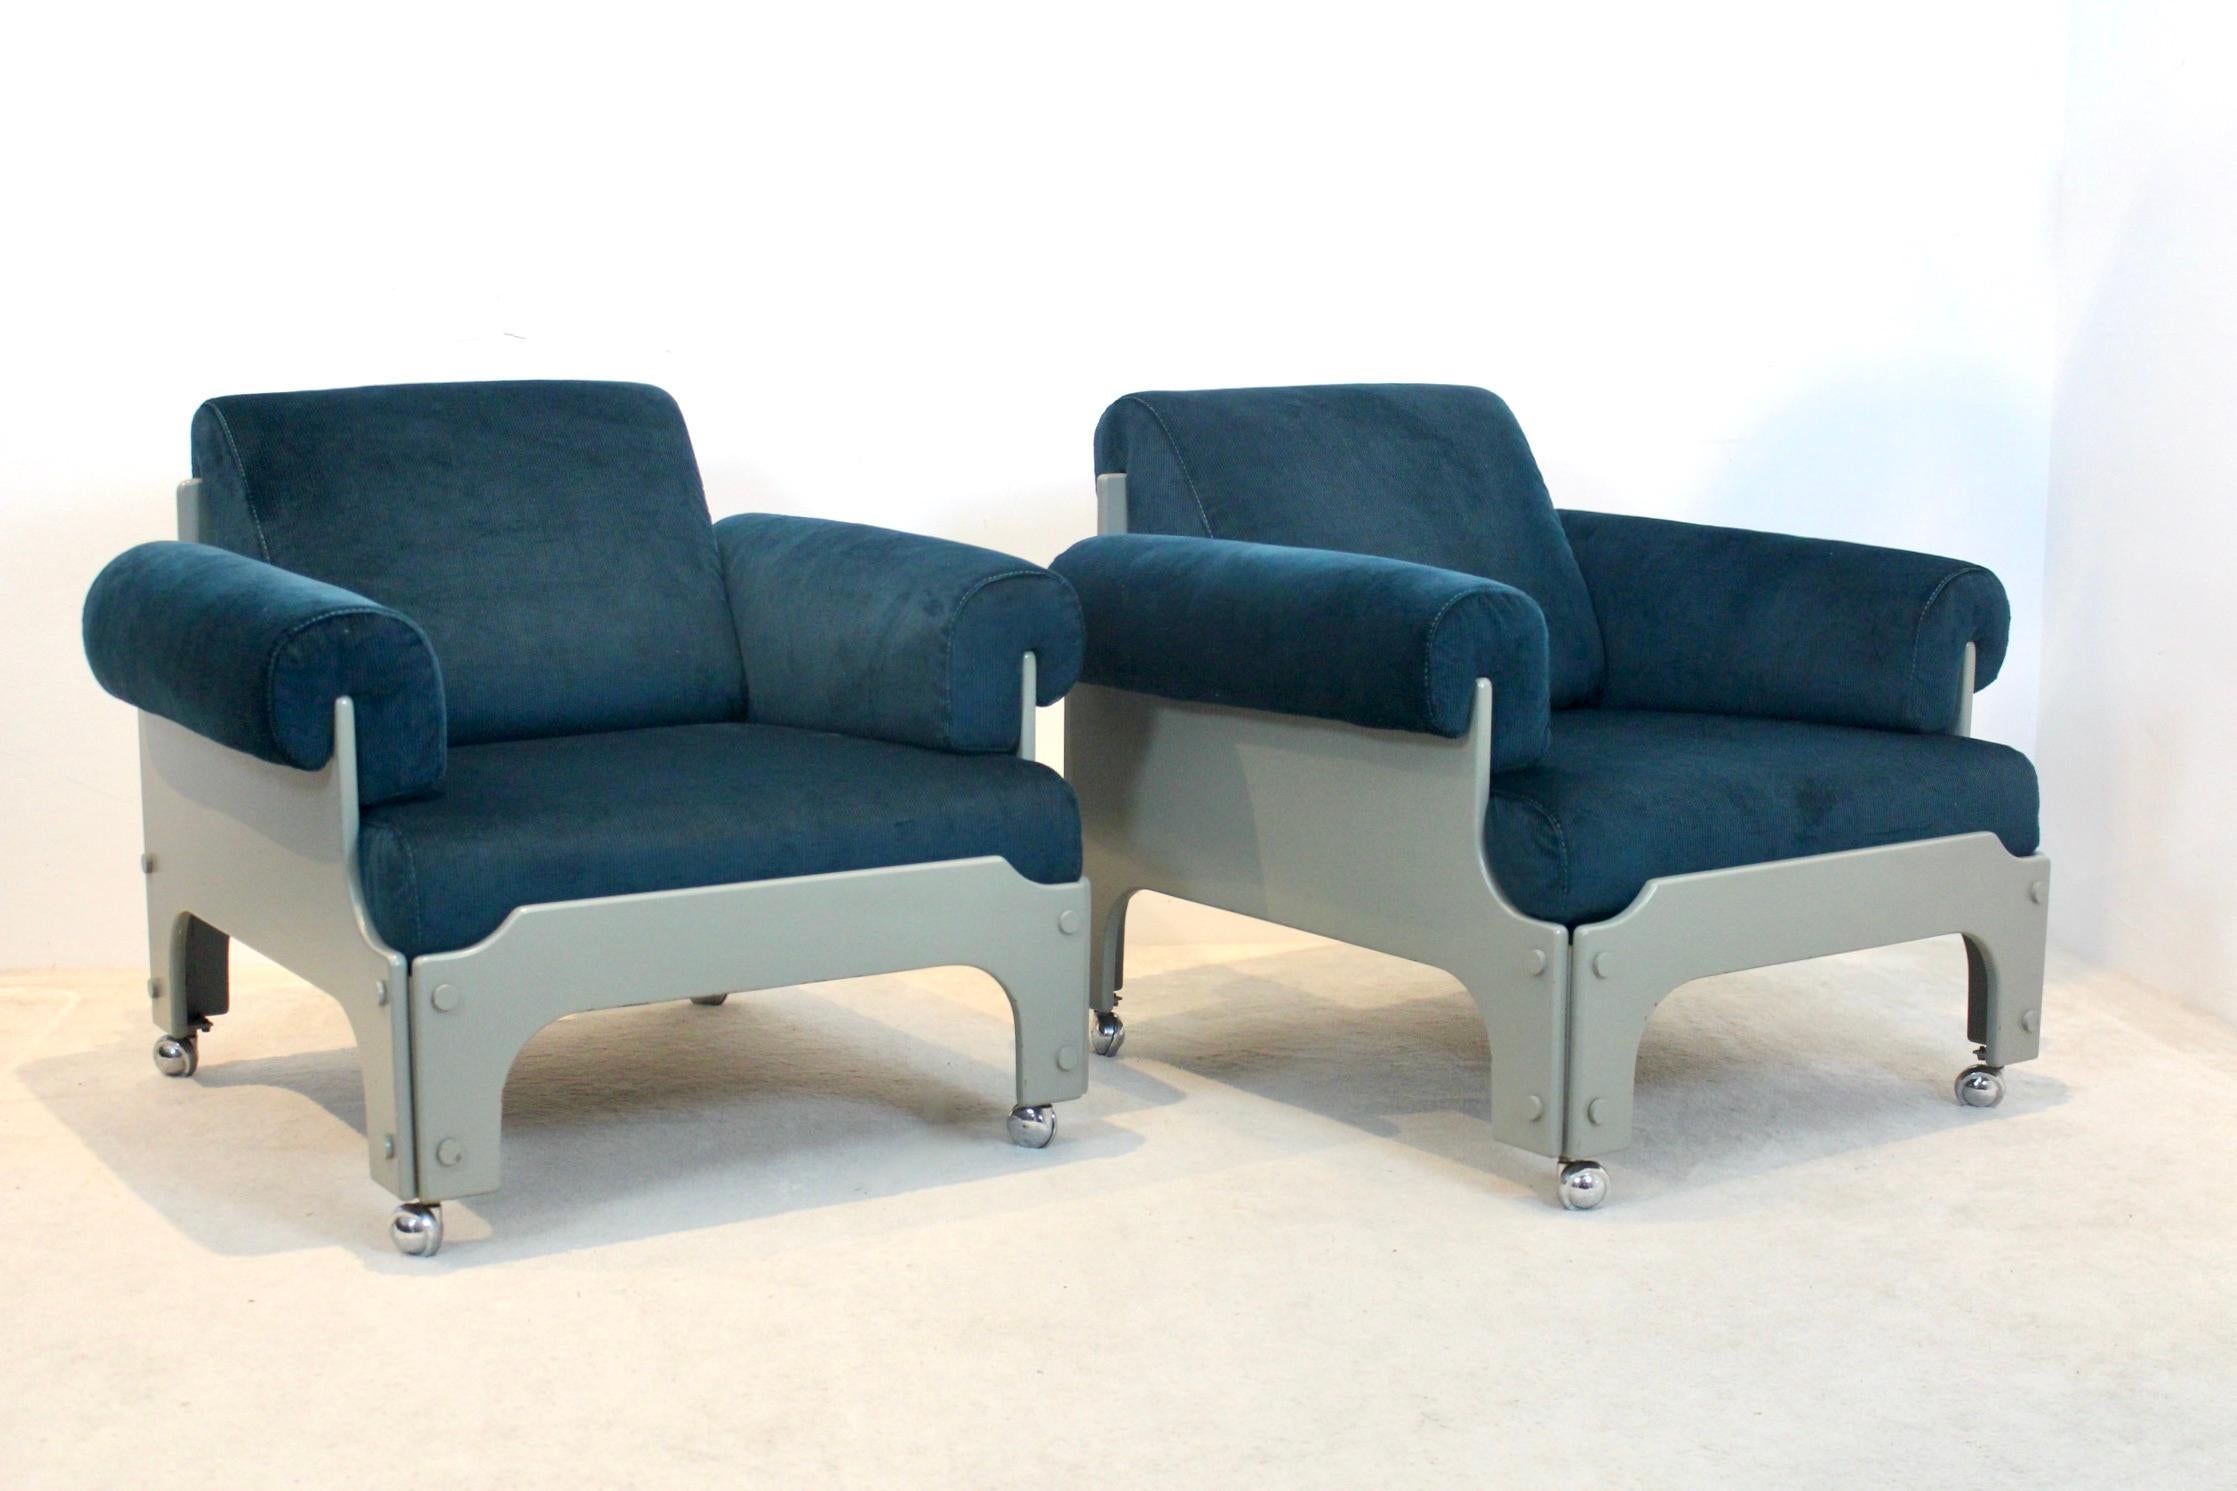 Very Rare SZ 85 Spectrum Easy Chairs by Jan Pieter Berghoef, 1968 For Sale 1